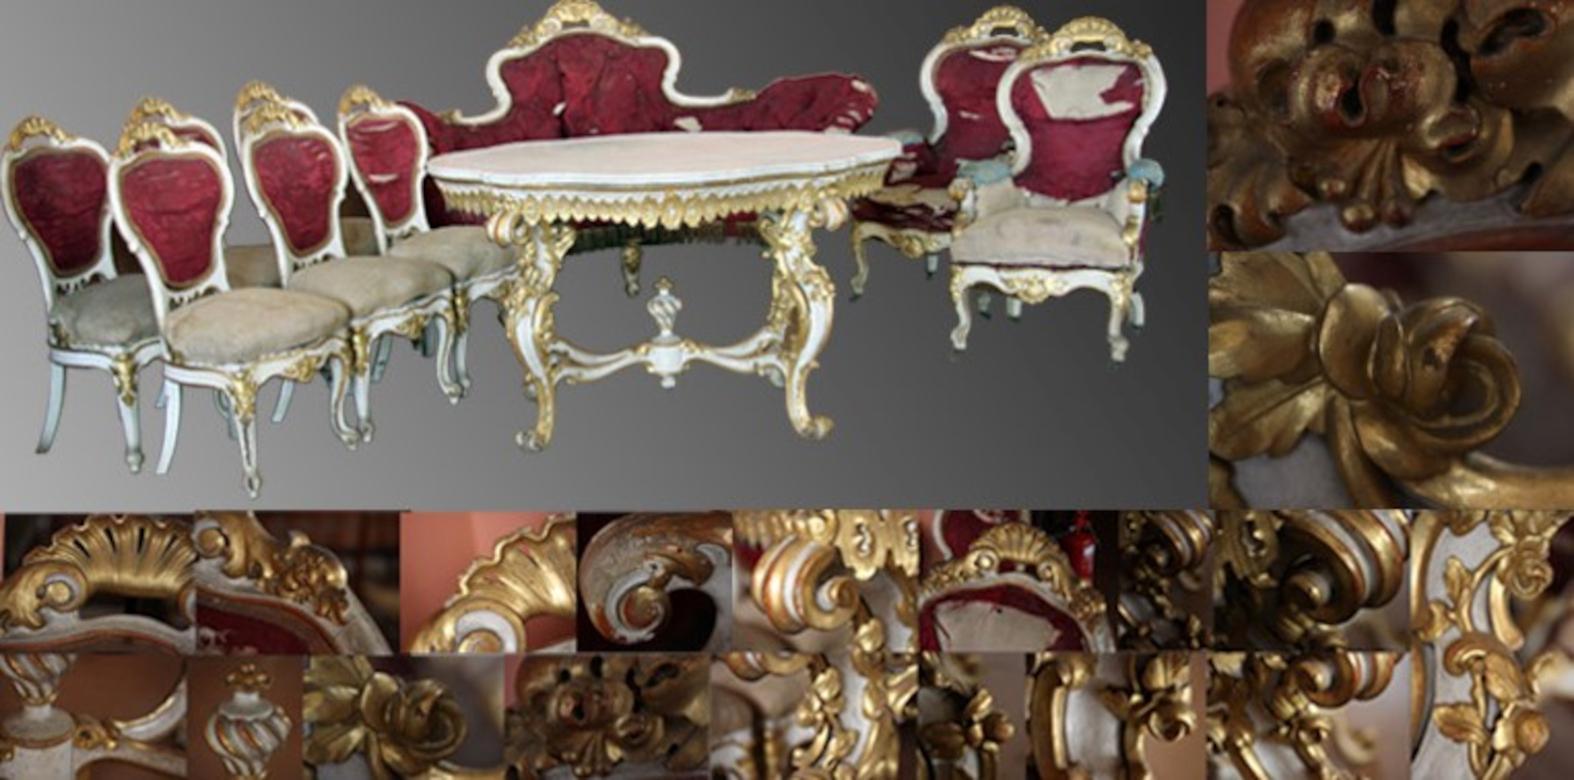 Lacquered and gilded sitting room 
Age: XIX century

Important living room of 1800, composed by six chairs, 2 armchairs, a sofa and a table.
White lacquering with carved and gilded details.

Upholstery to be restored (in photo an image of how the